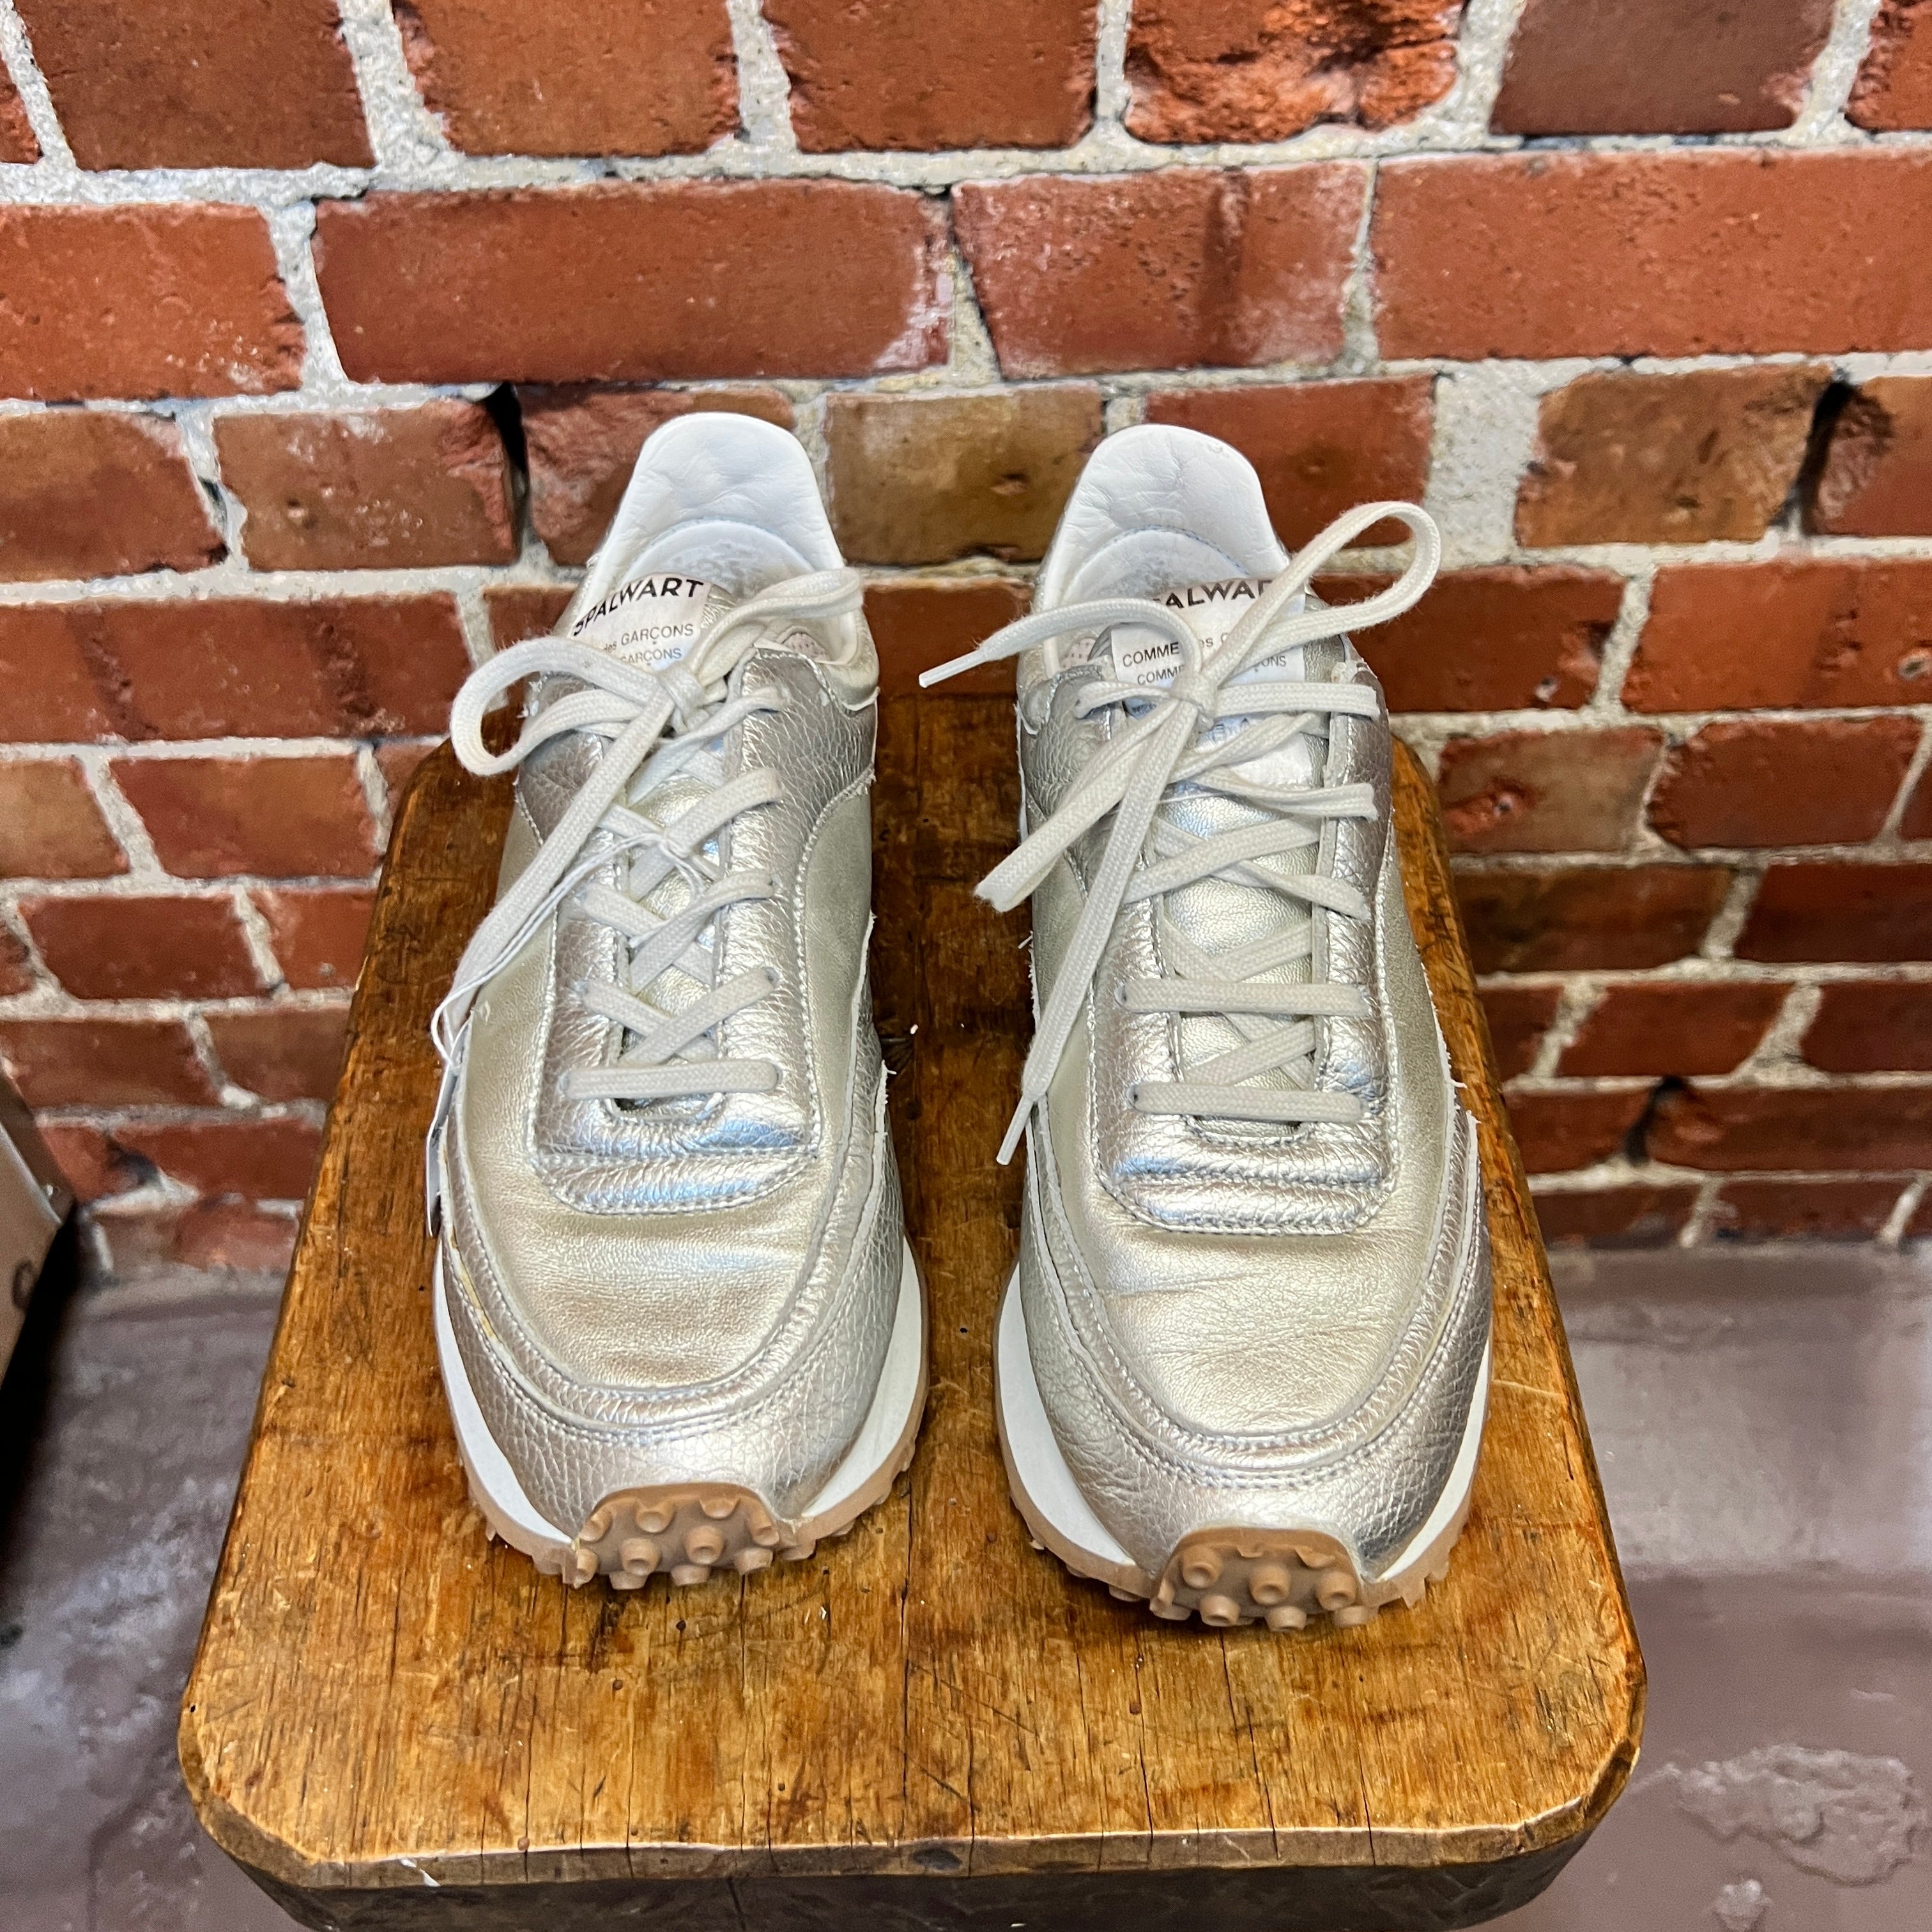 SPALWART X CDG silver leather sneakers 39